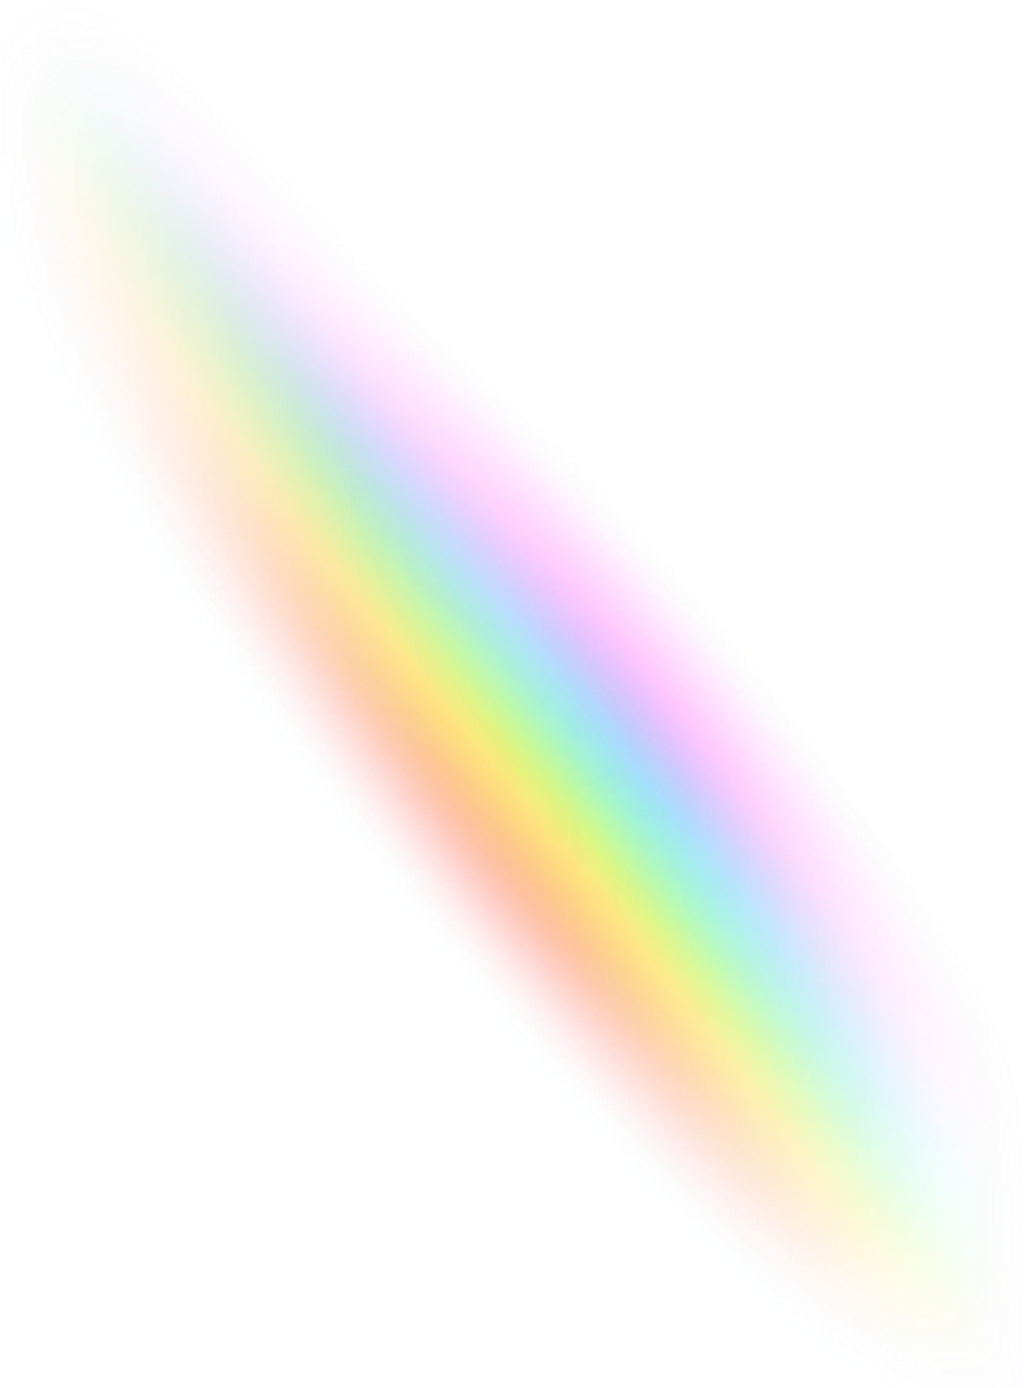 Abstract Rainbow Spectrum Artwork PNG image